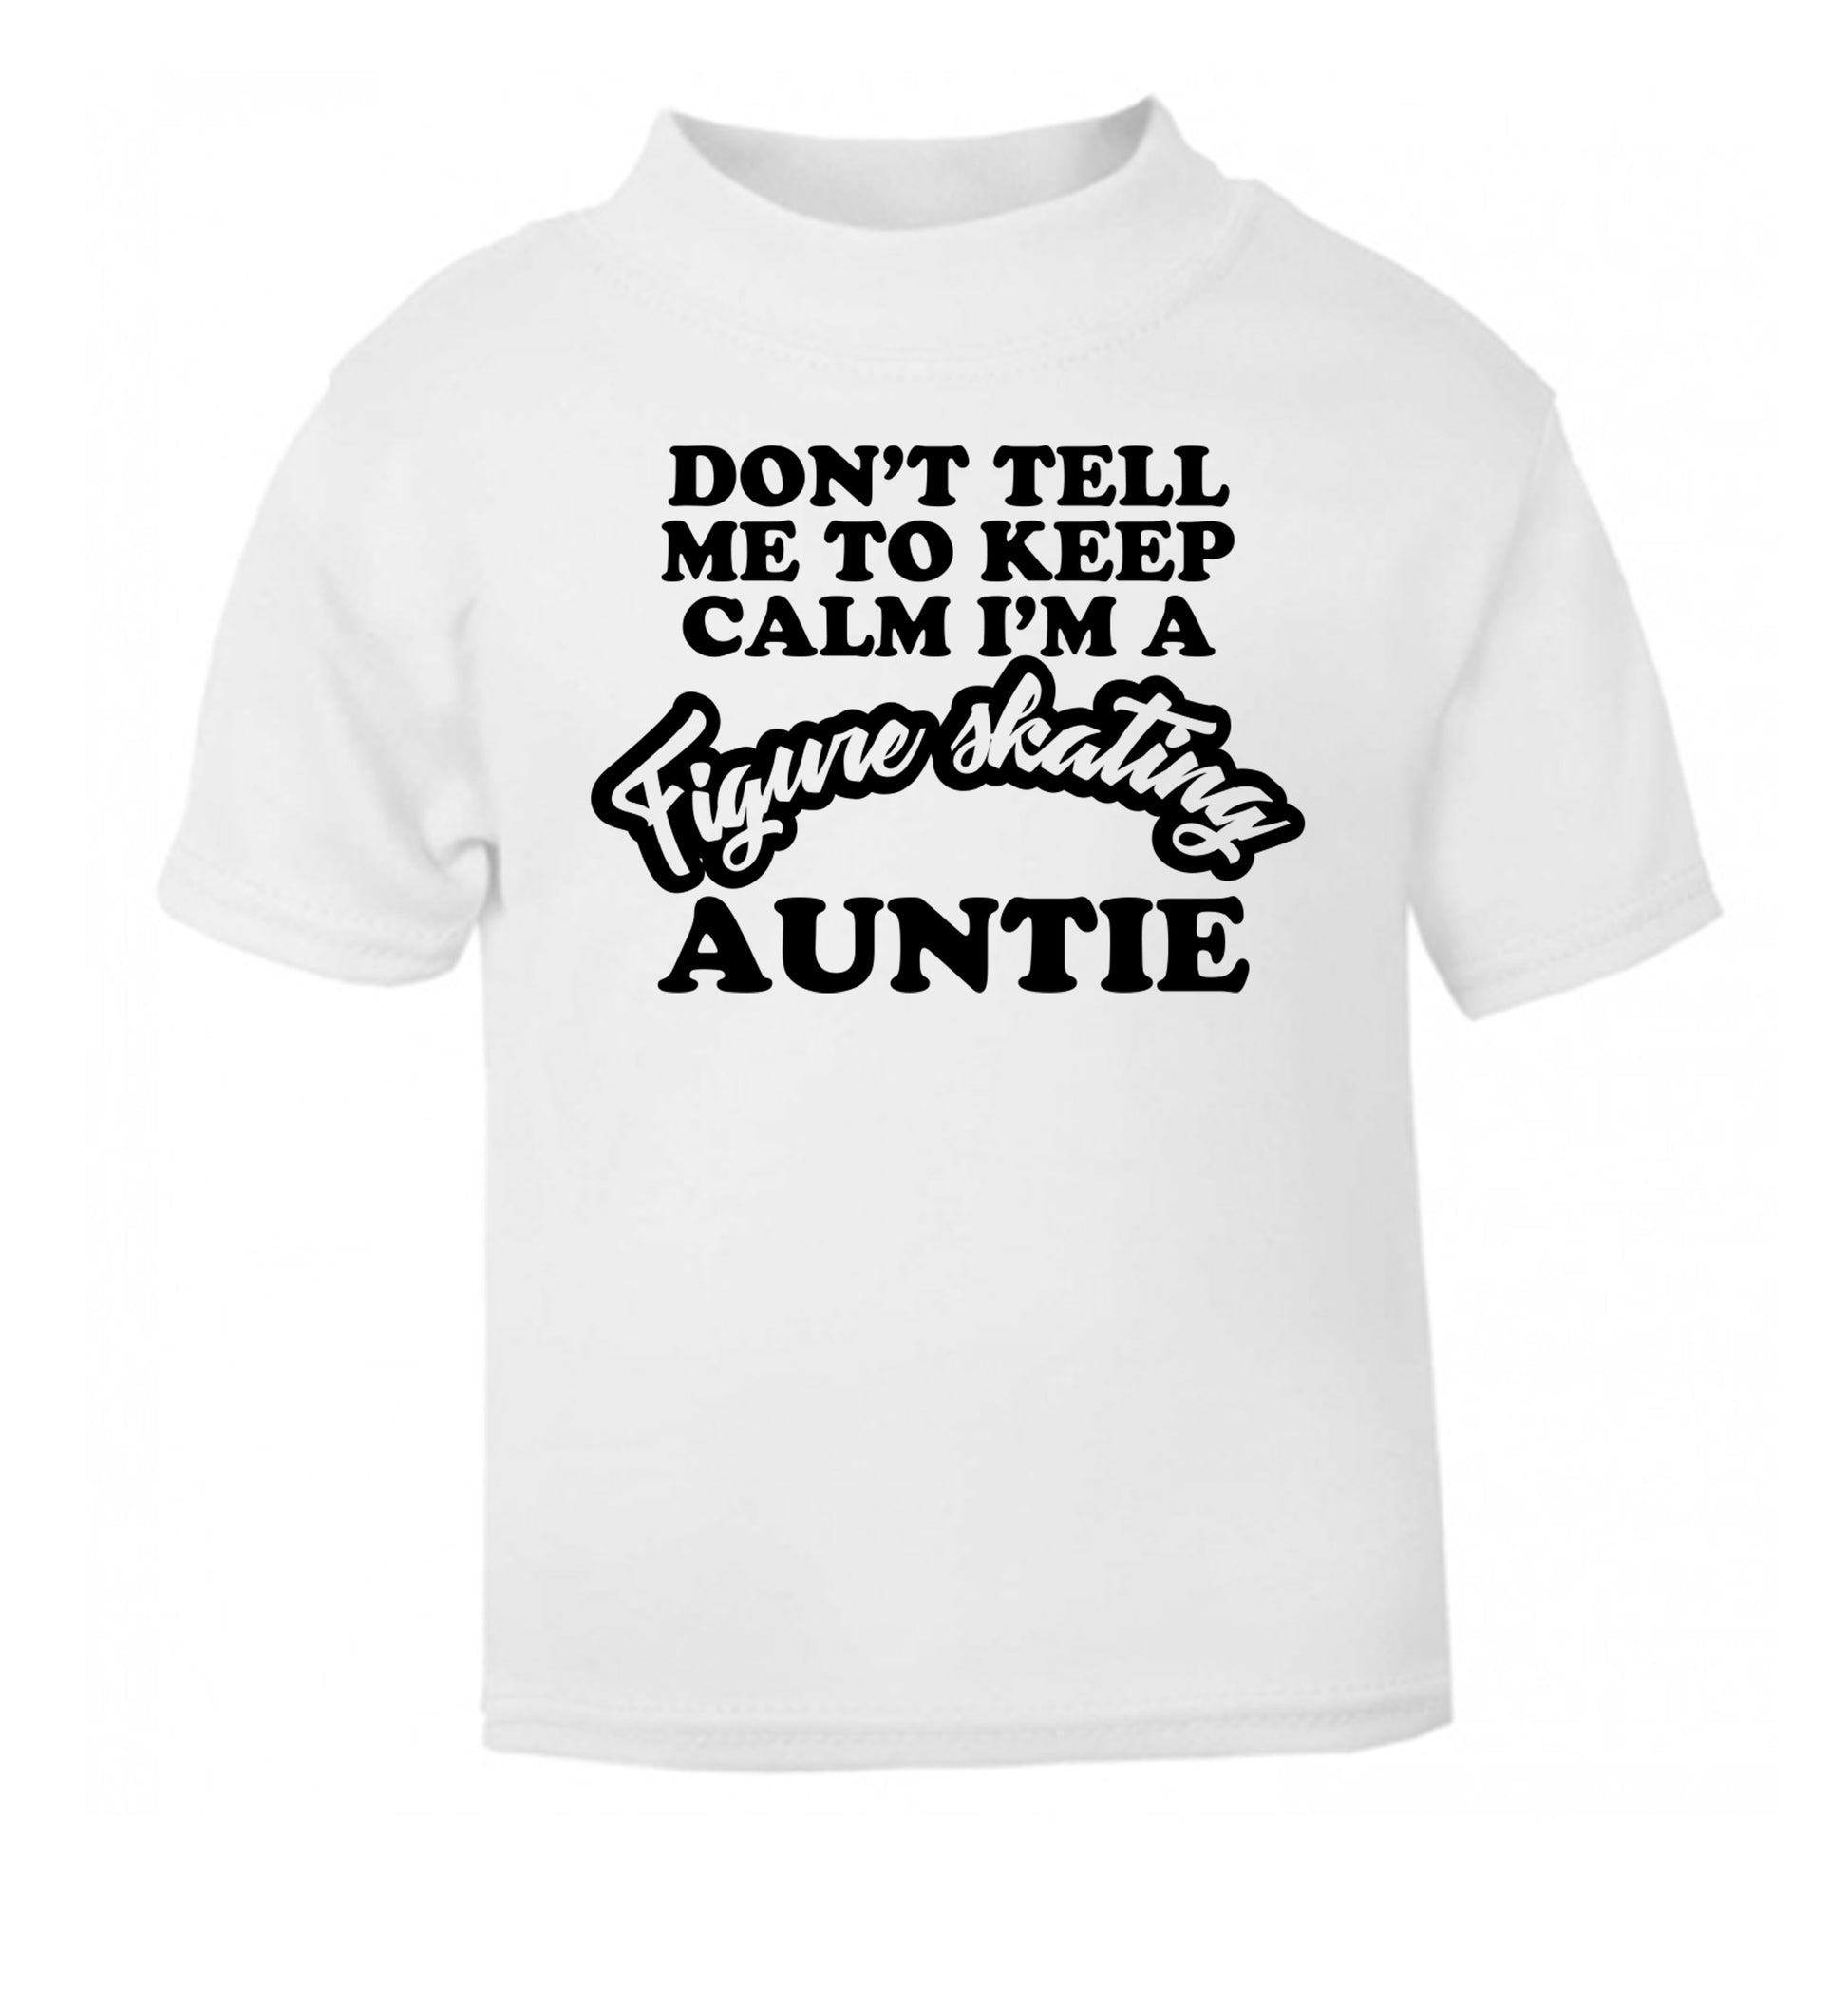 Don't tell me to keep calm I'm a figure skating auntie white Baby Toddler Tshirt 2 Years